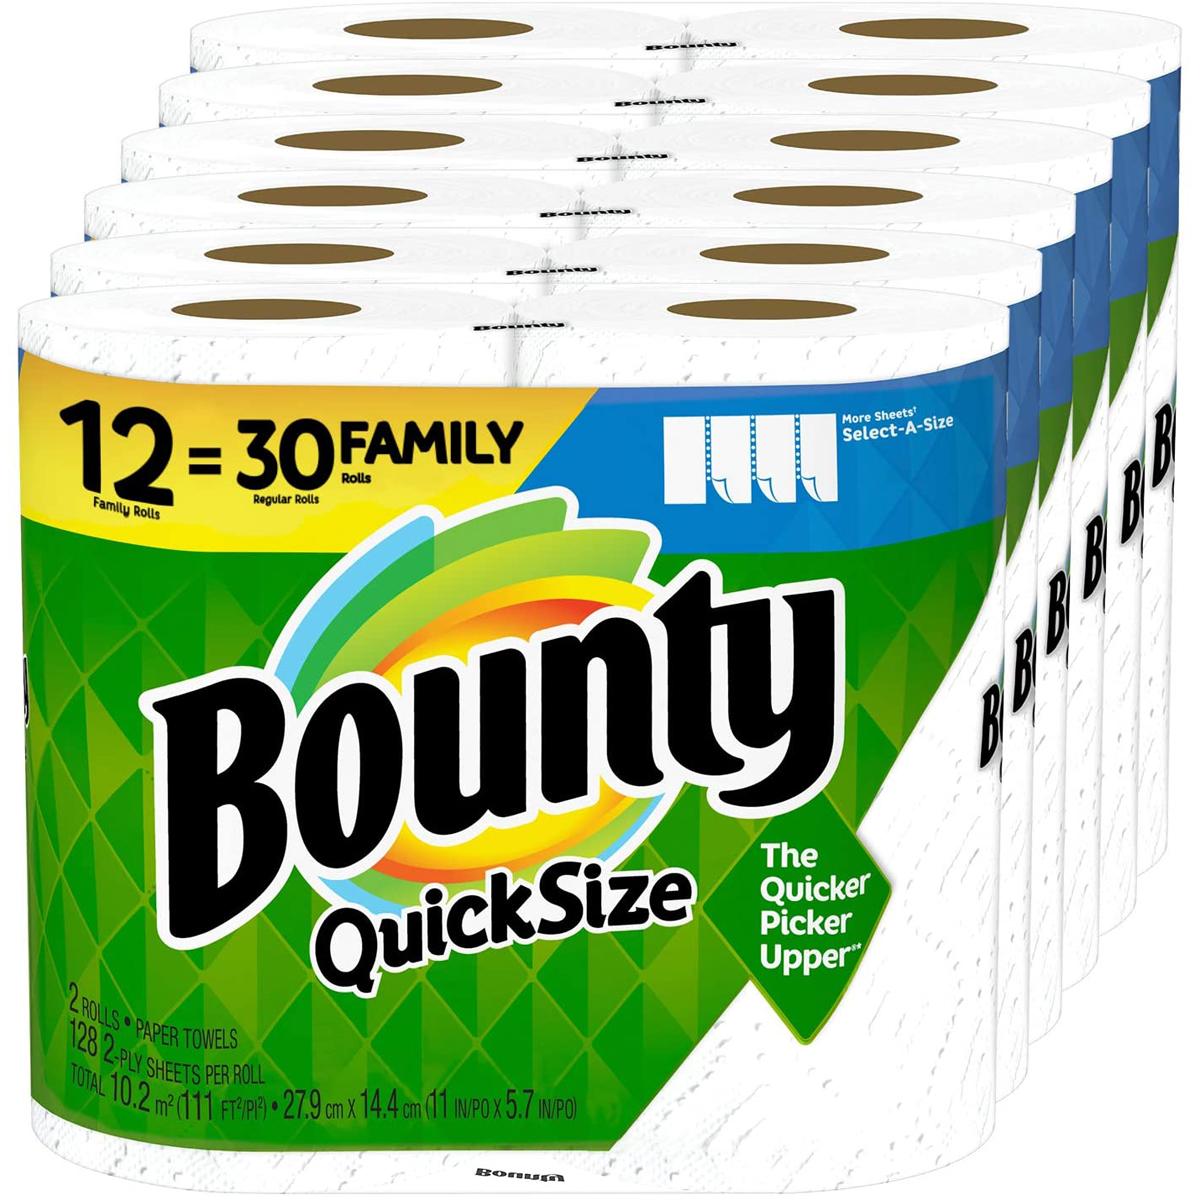 12 Bounty Quick-Size Paper Towels for $23.68